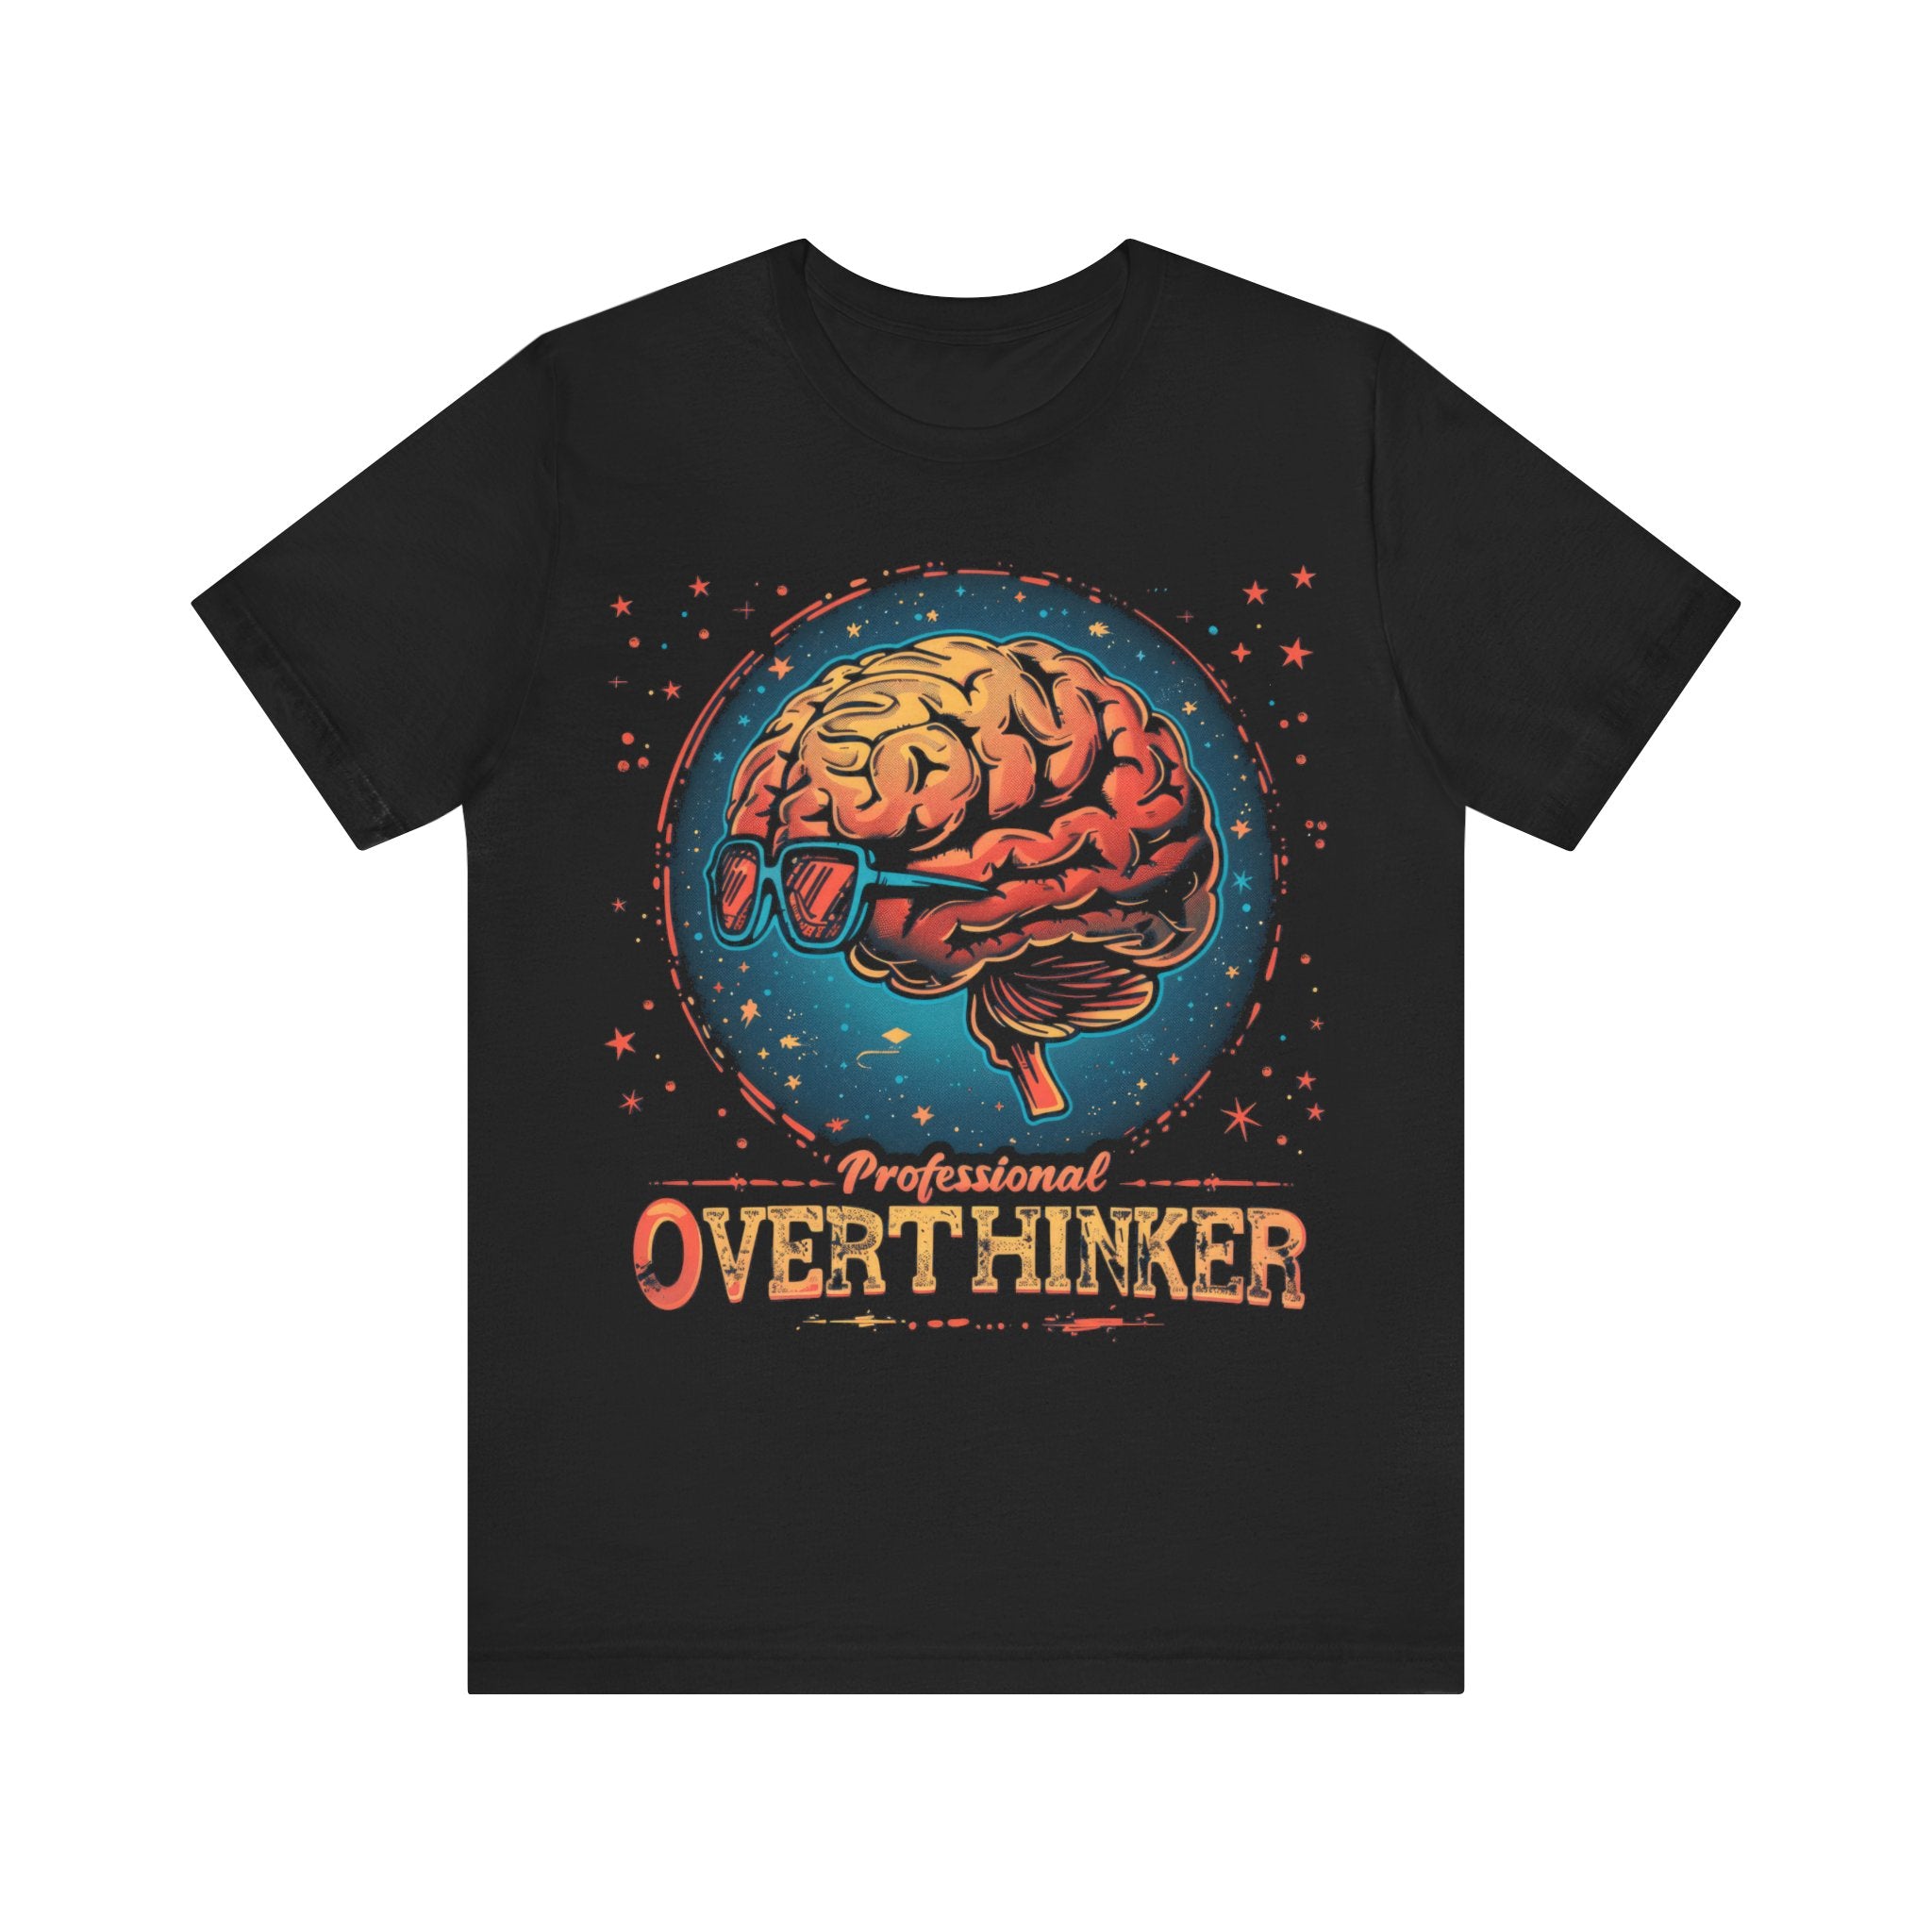 Professional Overthinker T-Shirt Funny Graphic Tee